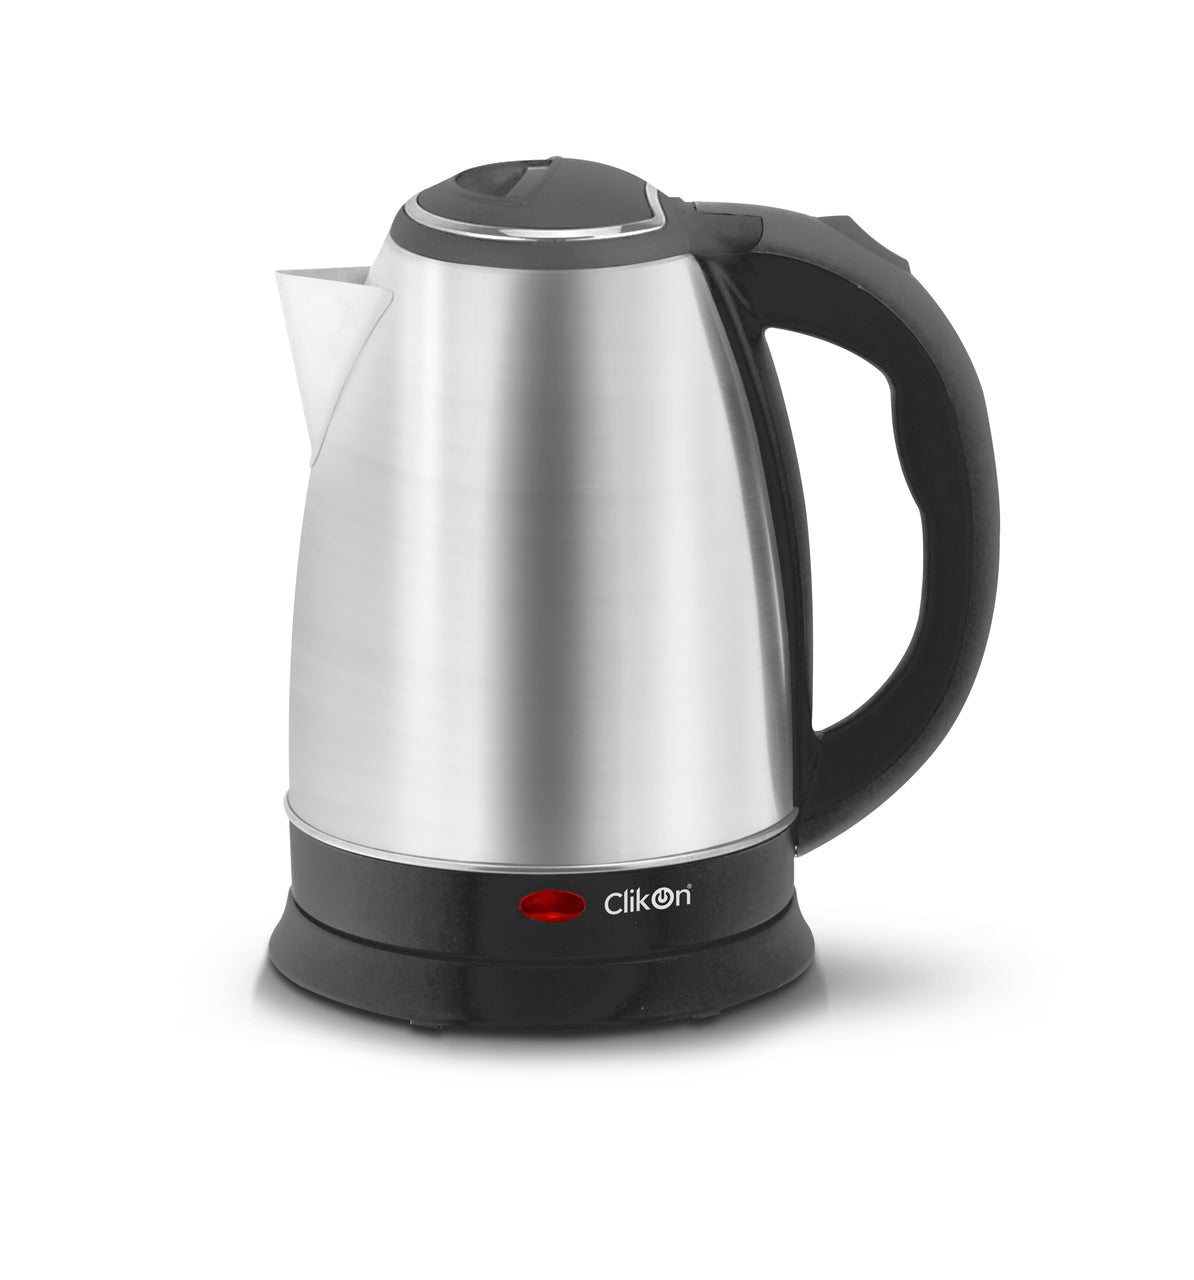 Clikon 1.8 L Cordless Stainless Steel Electric Kettle 2200W | Kitchen Appliance | Halabh.com